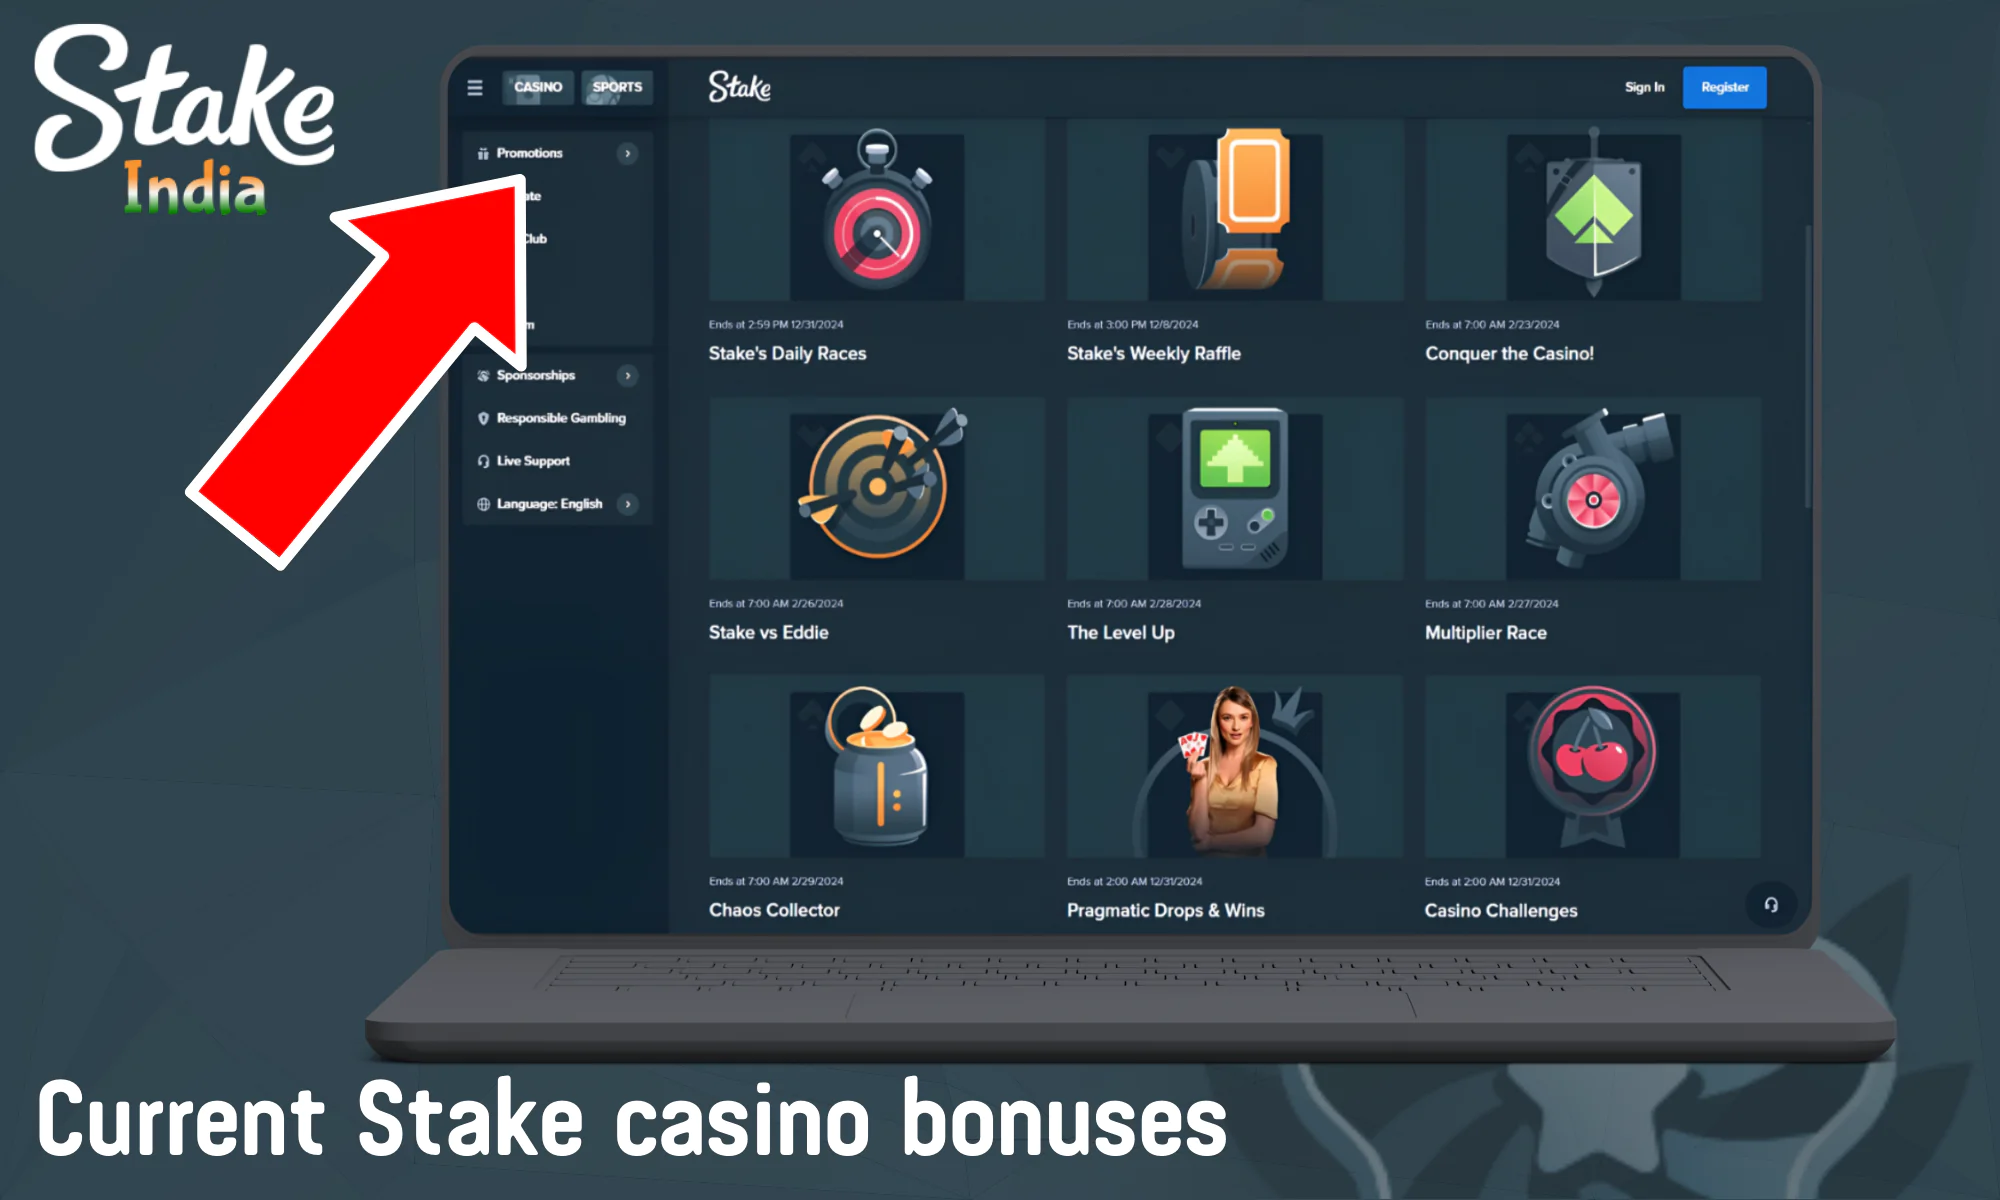 All current bonuses and promotions from Stake